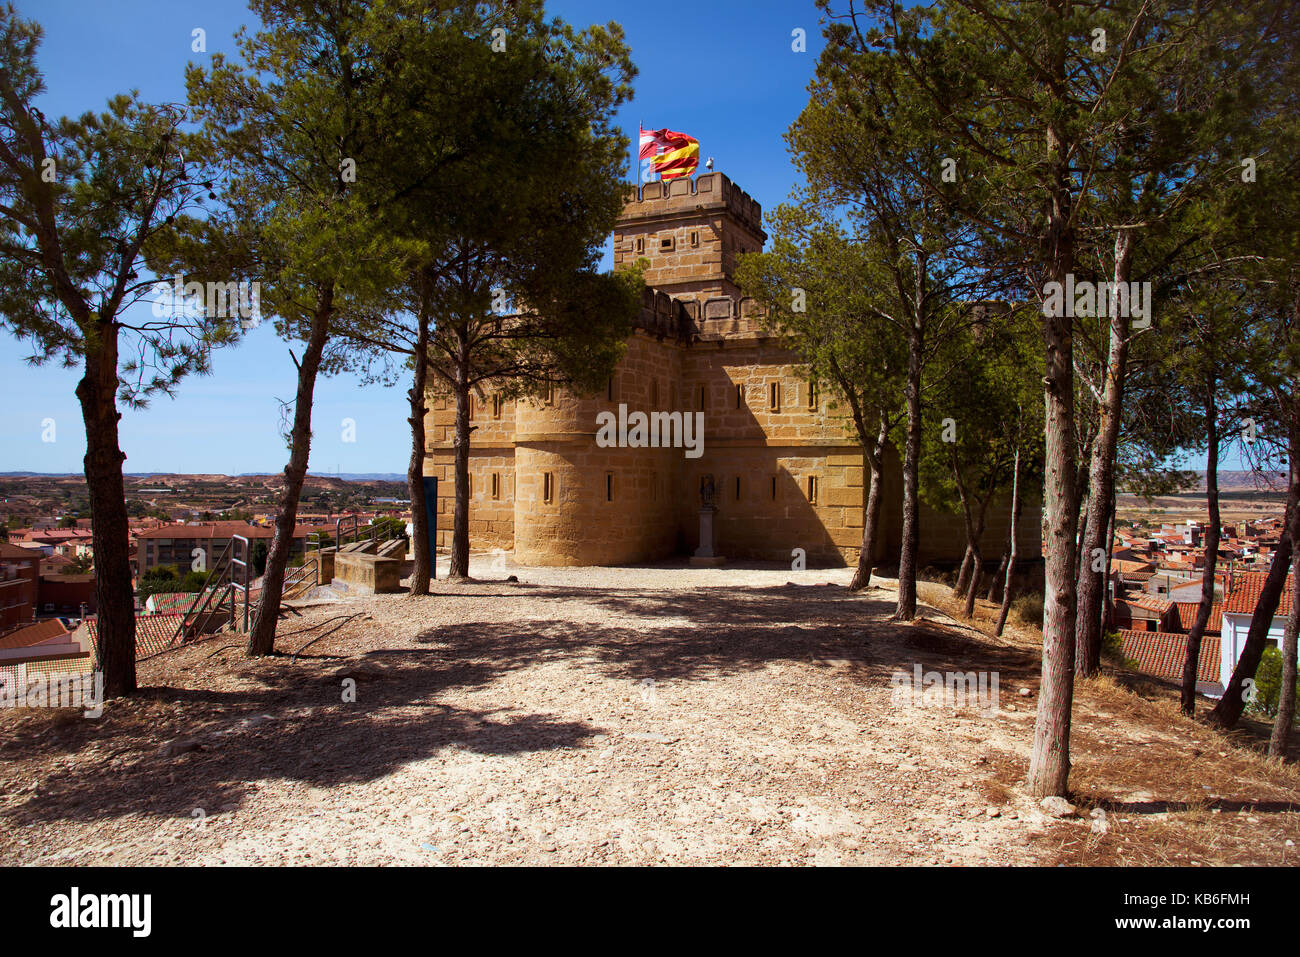 a view of the Torre de Salamanca tower in Caspe, Spain, built in 1875 Stock Photo